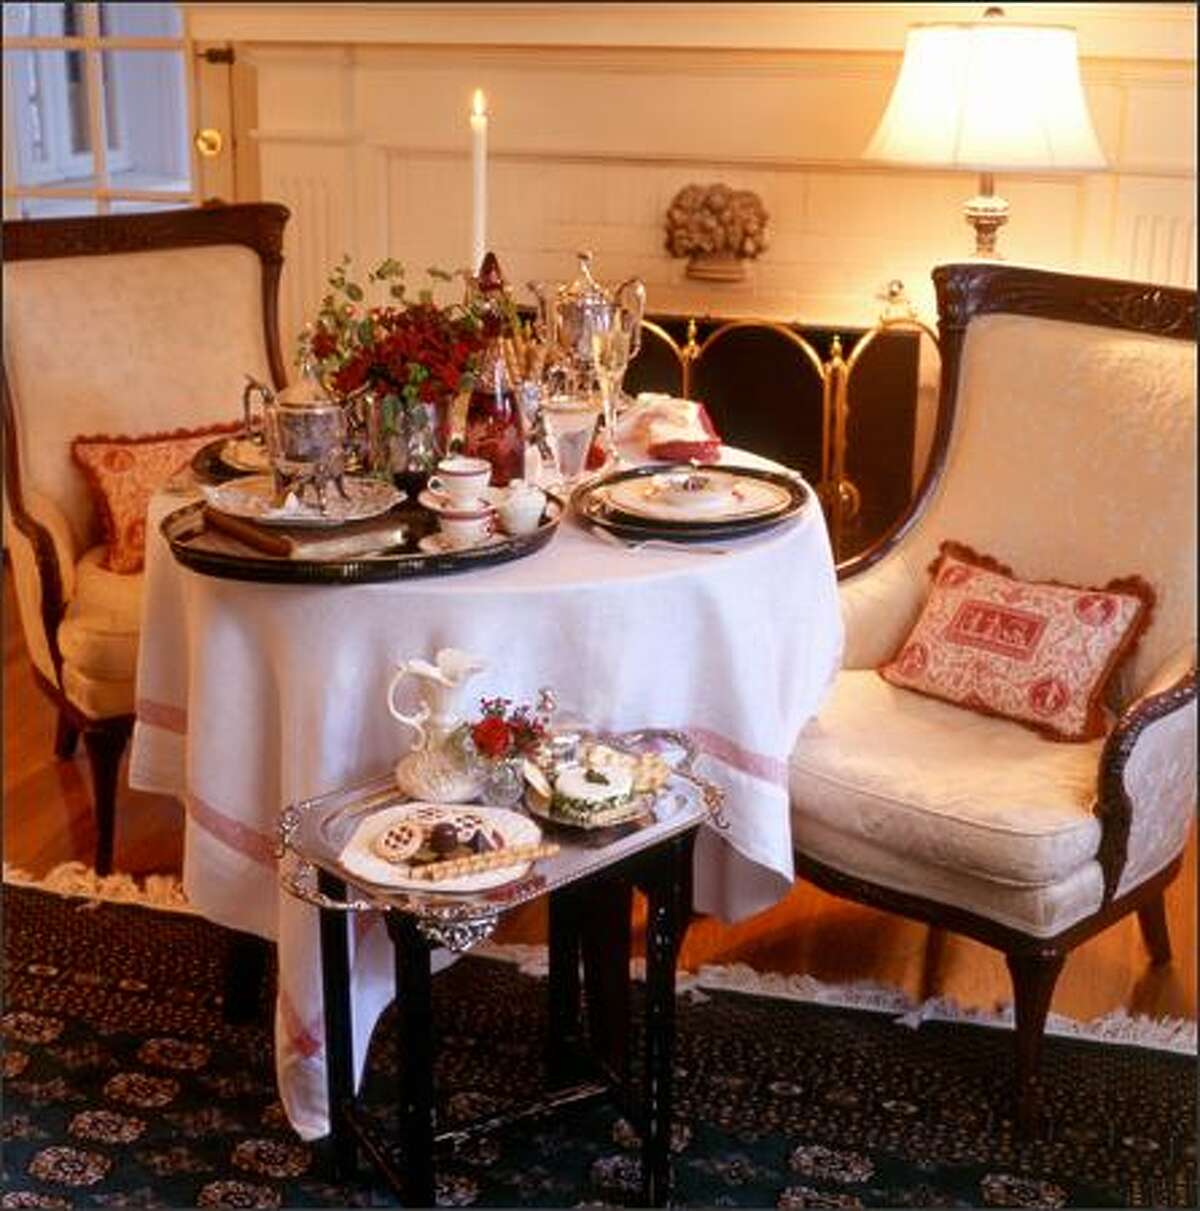 When you're setting the stage for a romantic dinner, decorate a few key areas to create loads of drama. (BRYAN E. MCCAY / SHNS)